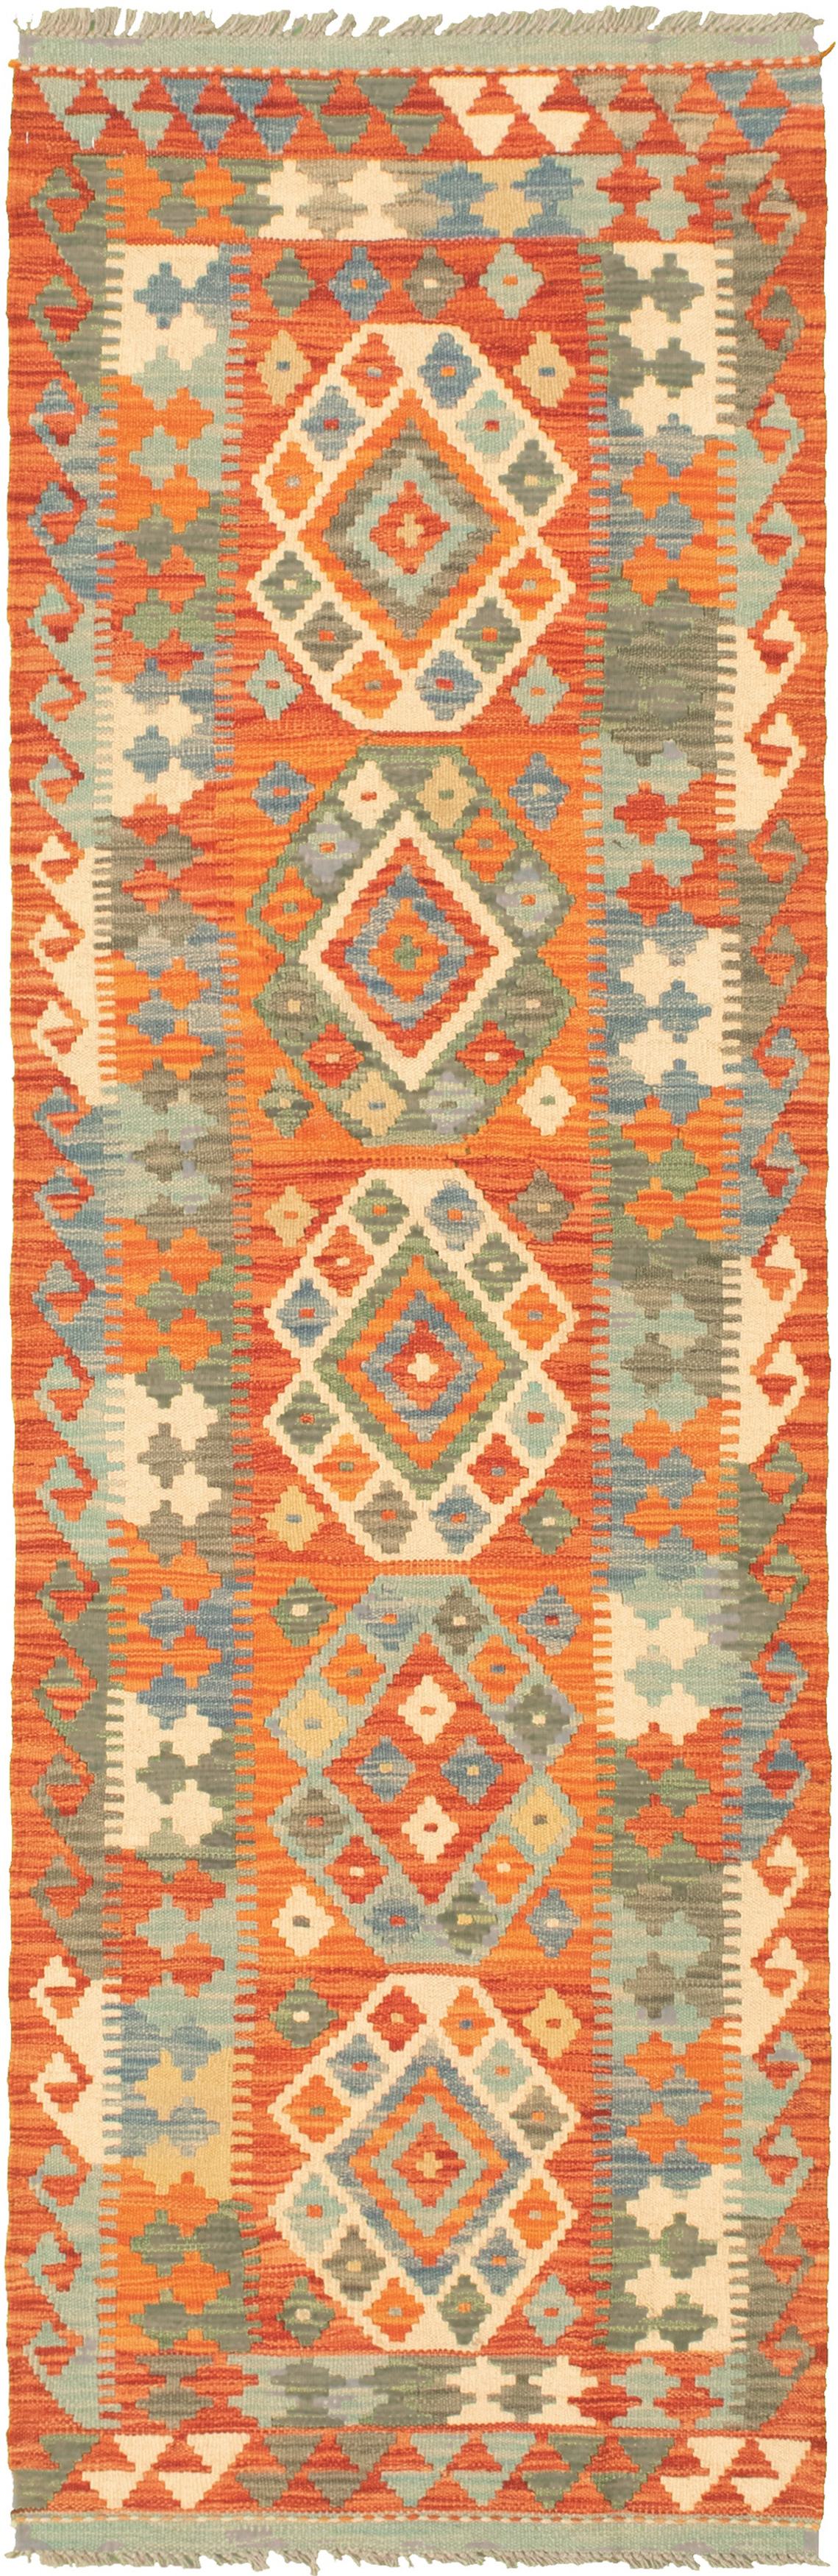 Hand woven Bold and Colorful  Dark Copper Wool Kilim 2'4" x 7'9" Size: 2'4" x 7'9"  